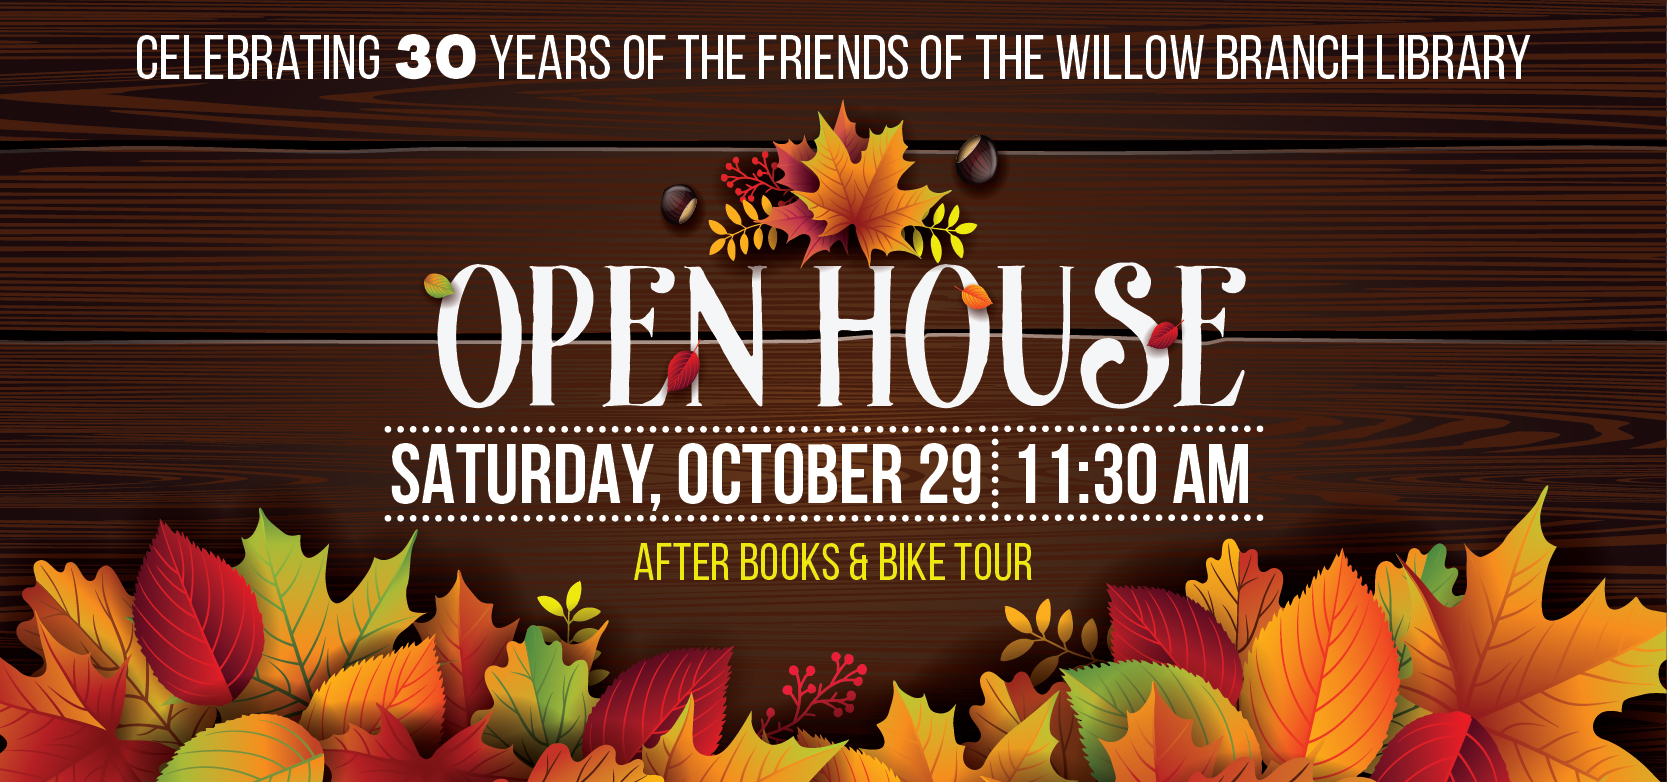 Willow Branch Library 30th Celebration and Open House